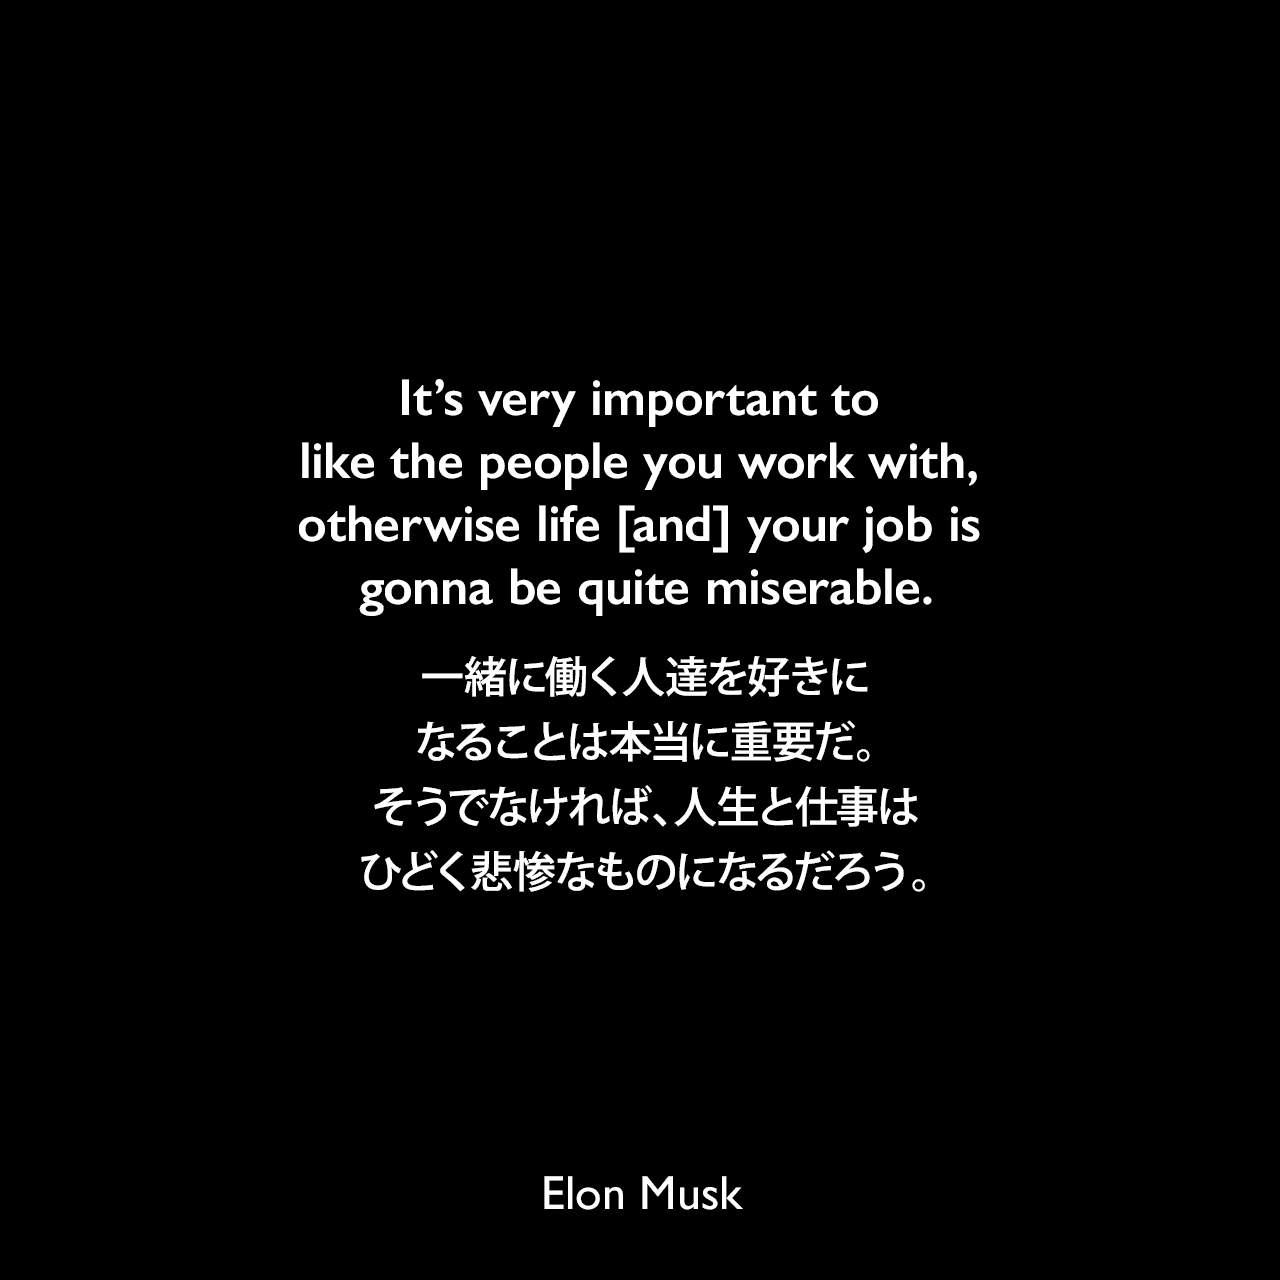 It’s very important to like the people you work with, otherwise life [and] your job is gonna be quite miserable.一緒に働く人達を好きになることは本当に重要だ。そうでなければ、人生と仕事はひどく悲惨なものになるだろう。Elon Musk